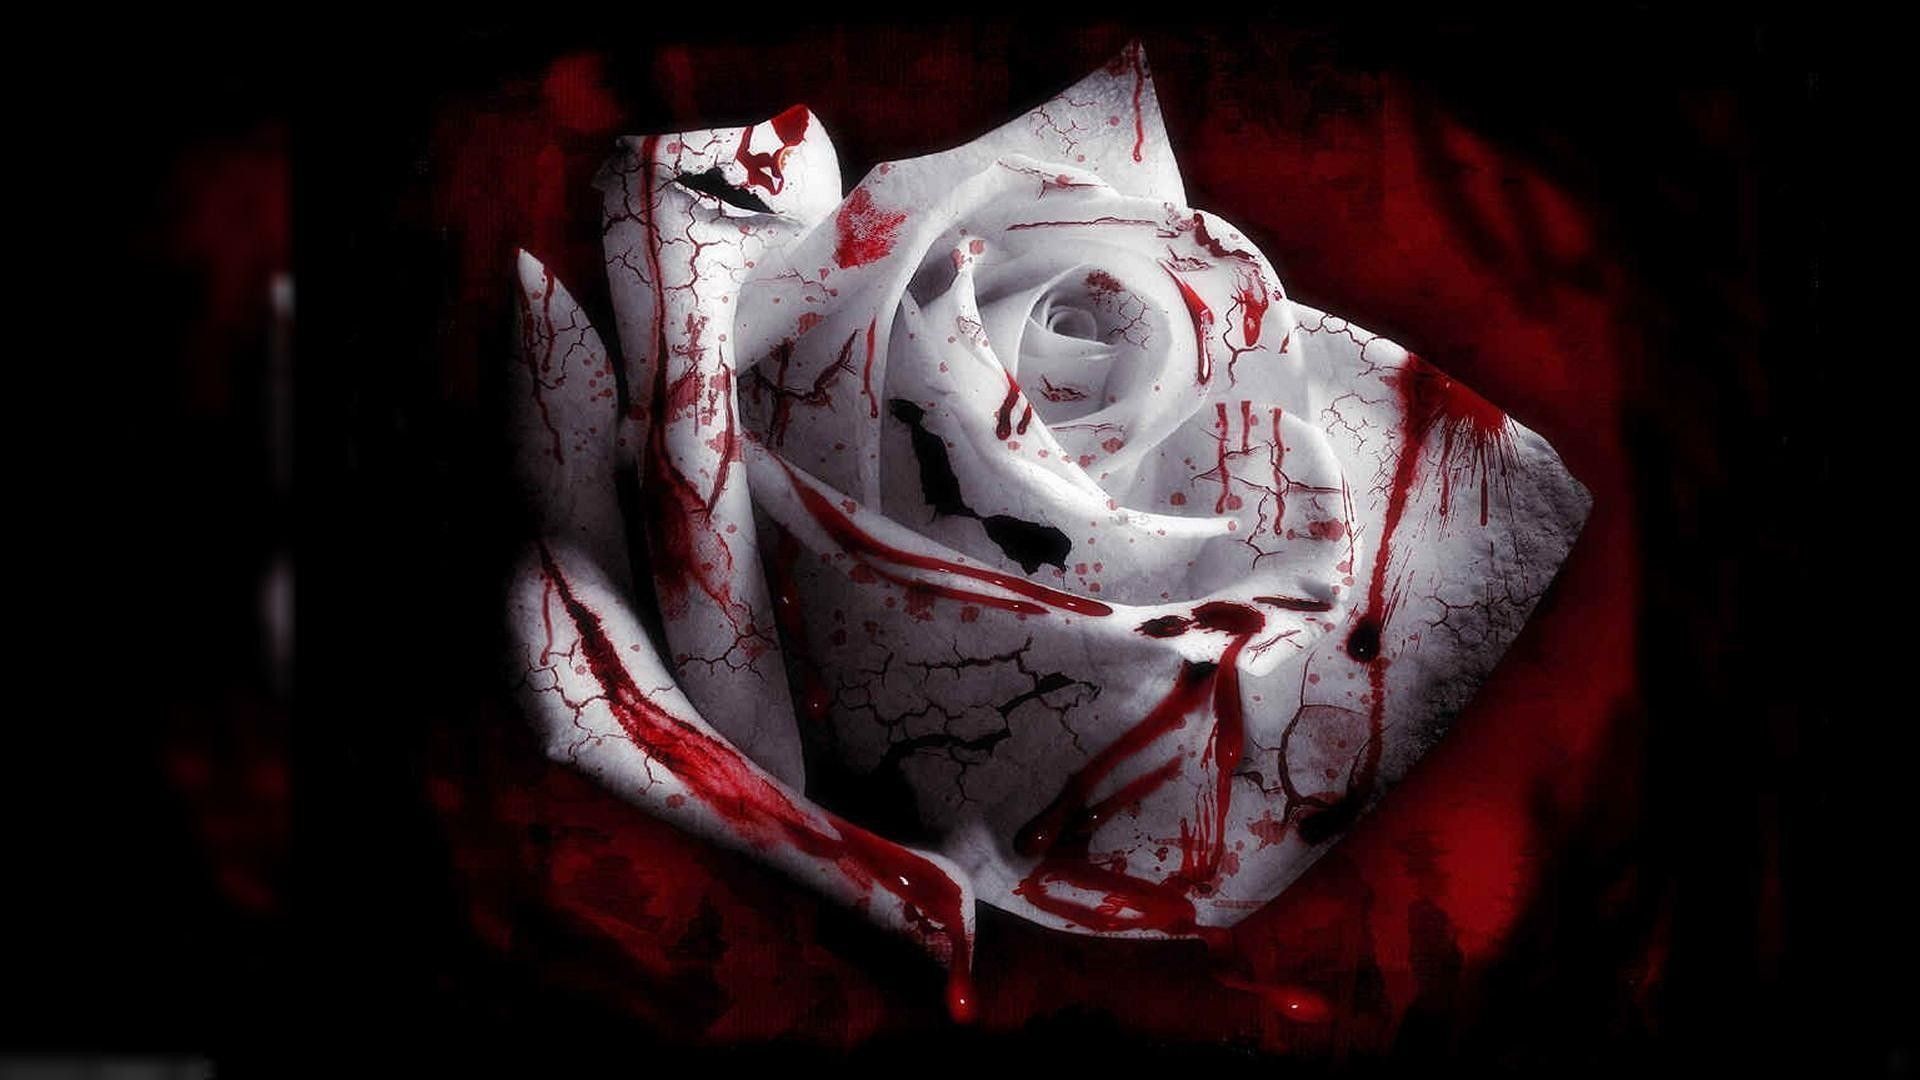 A rose with blood on it is shown - Horror, creepy